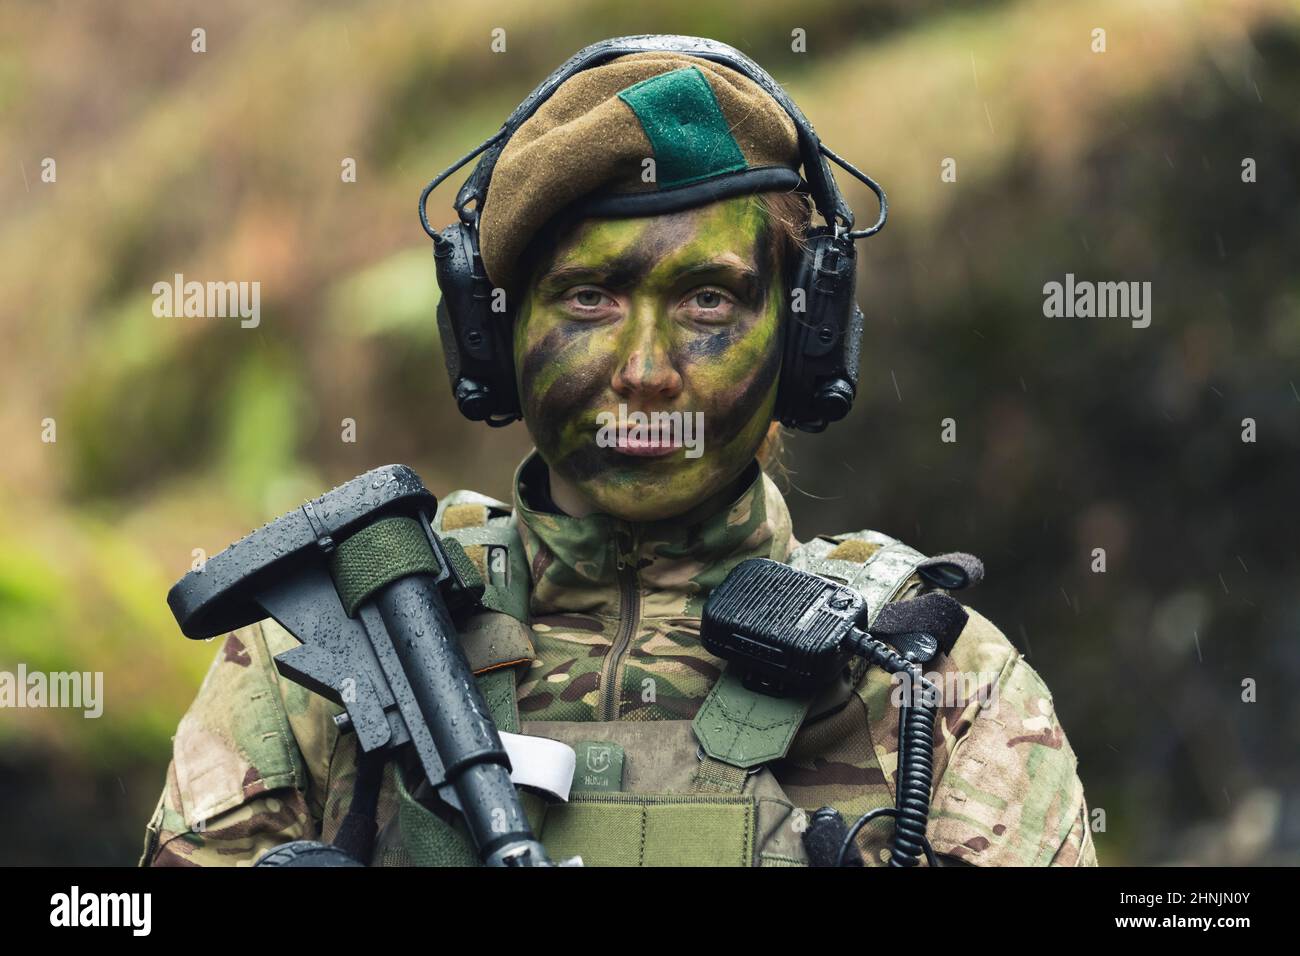 Cold hearted tough woman soldier serving her motherland . High quality photo Stock Photo